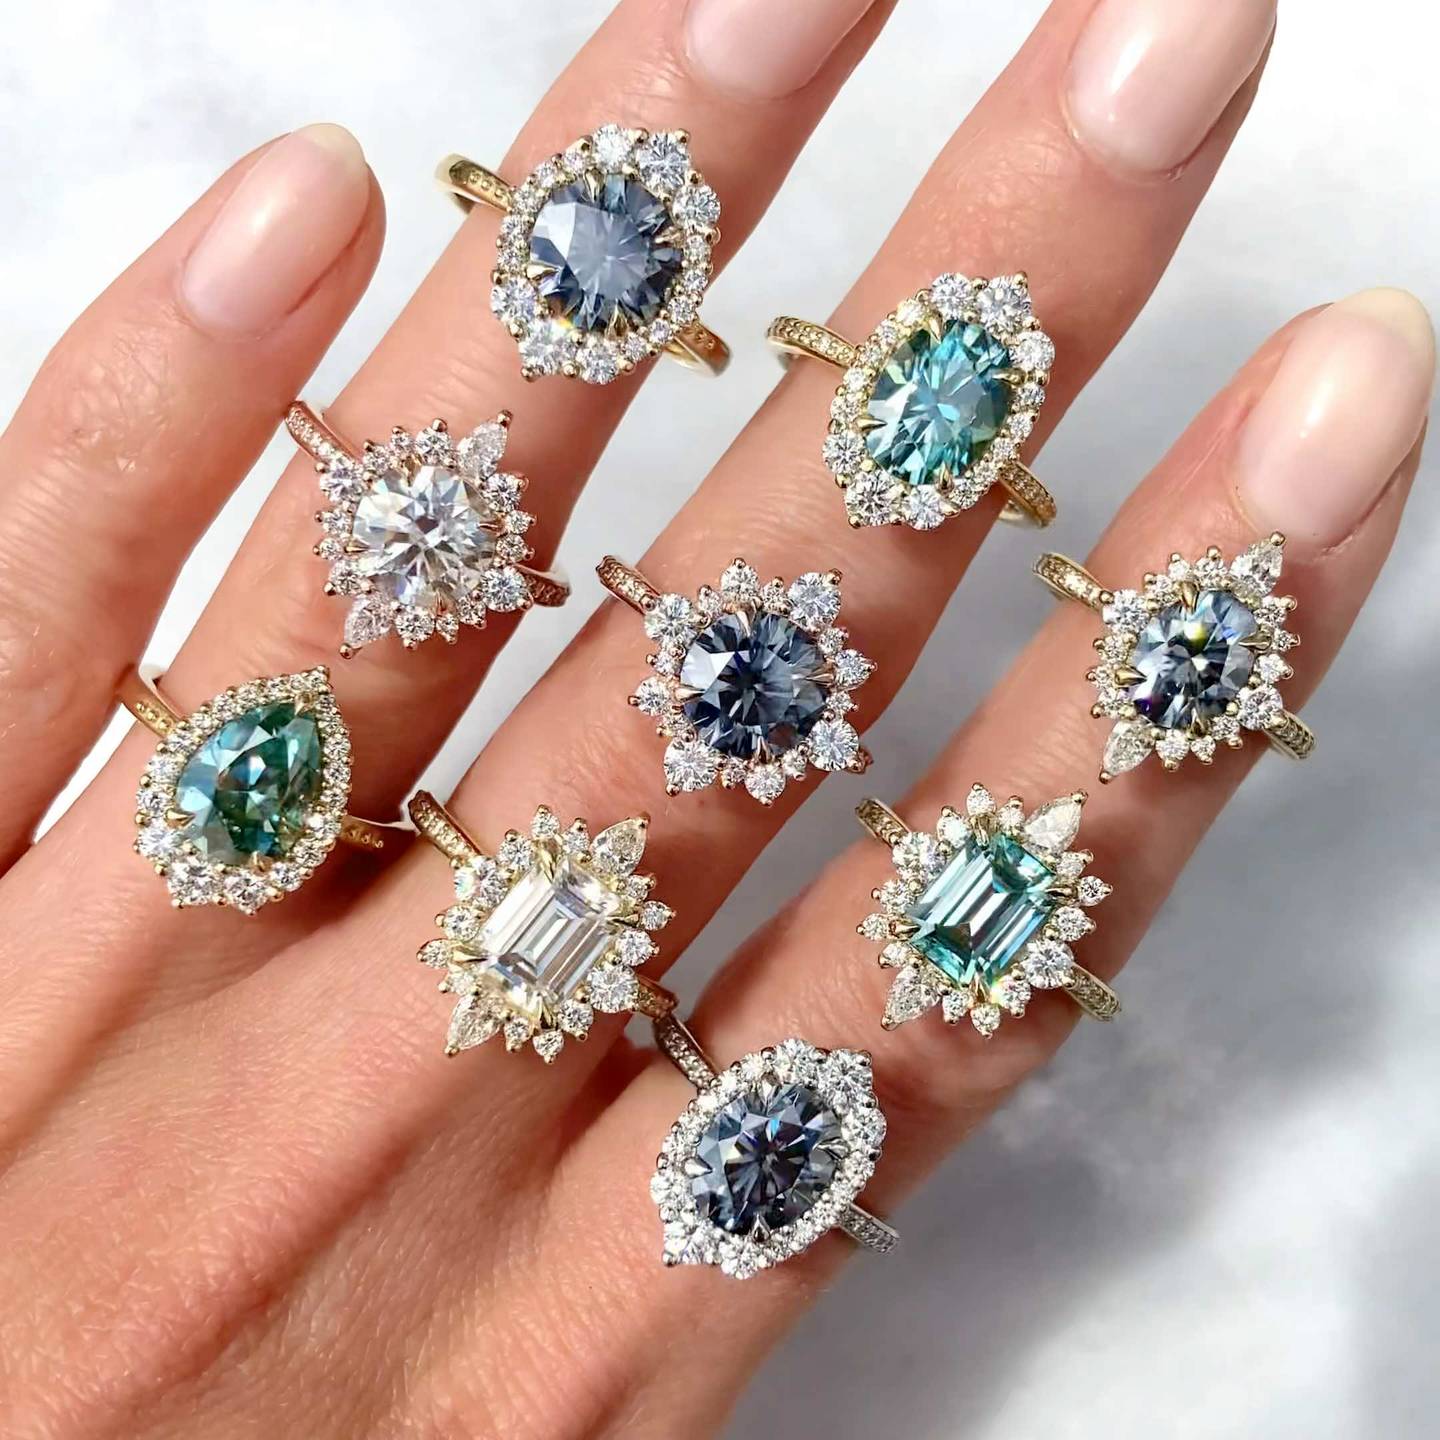 Shop Vintage and Contemporary Rings